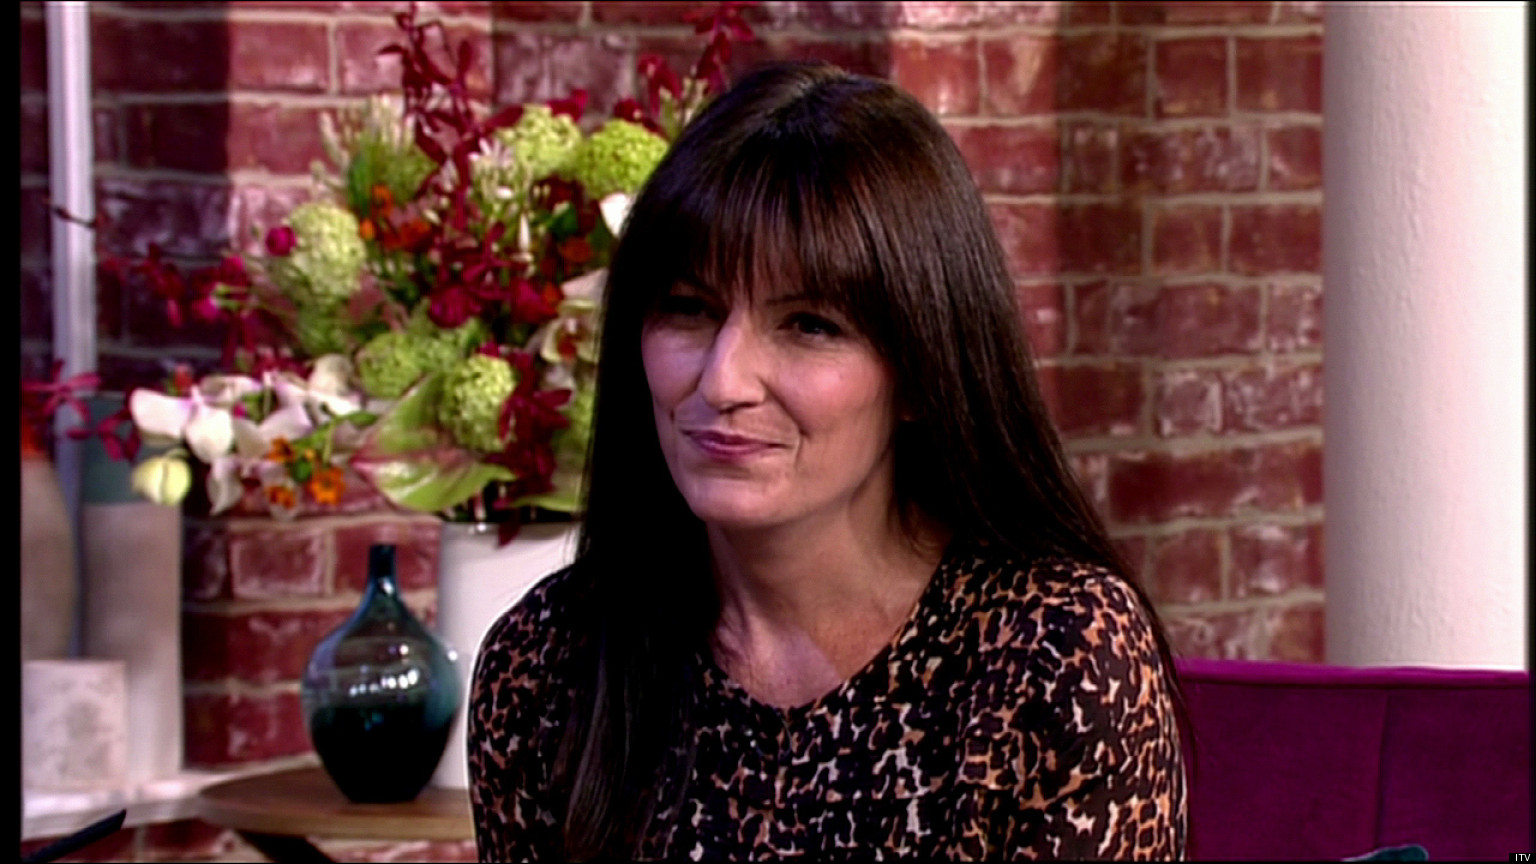 Davina McCall: 'I'm Not A Perfect Gym Bunny, I Have To Work At It' | HuffPost UK